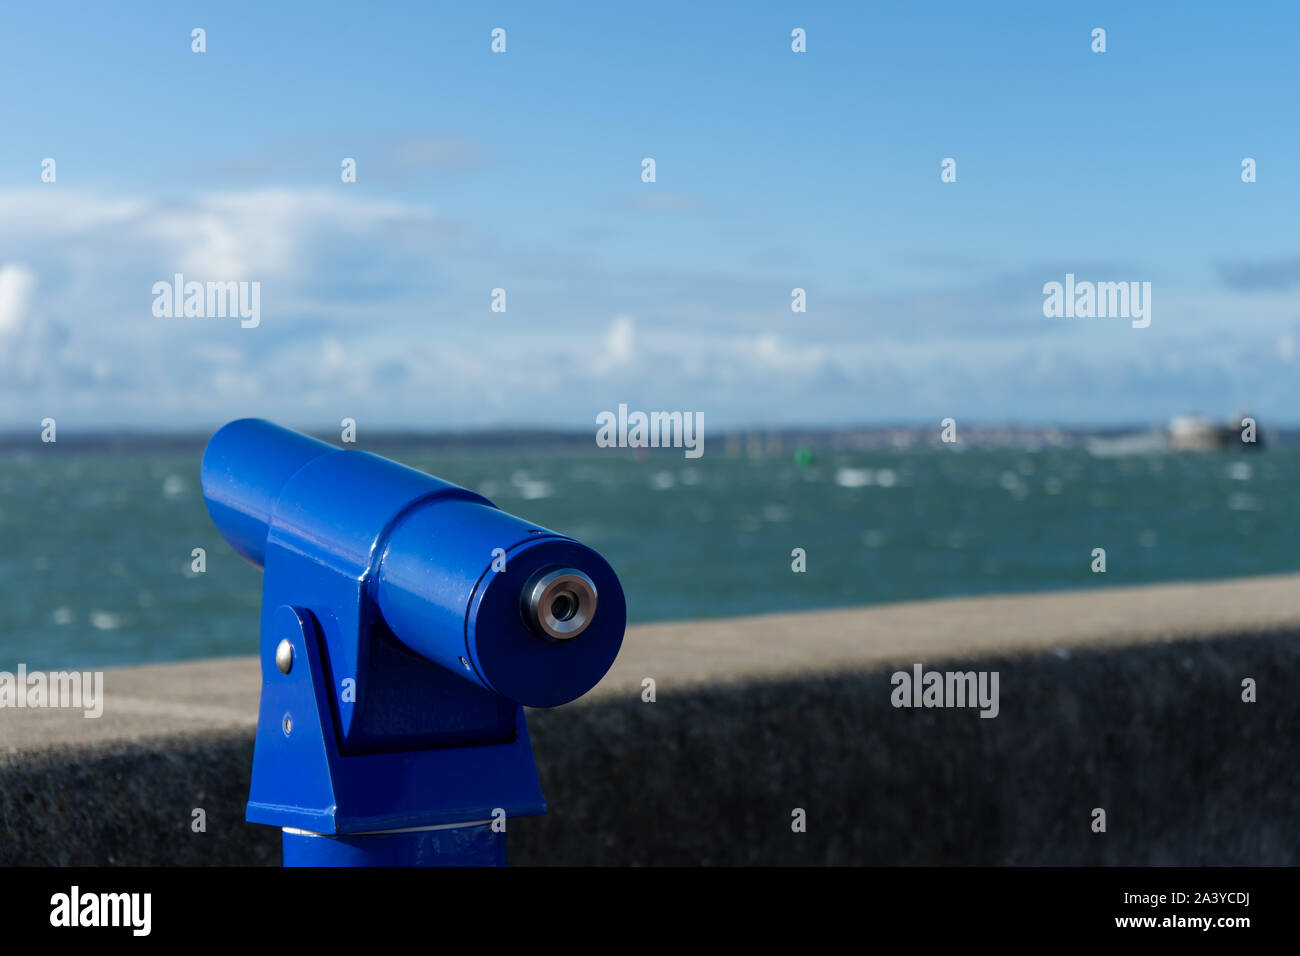 A pay per view telescope looking out to a view of the sea Stock Photo